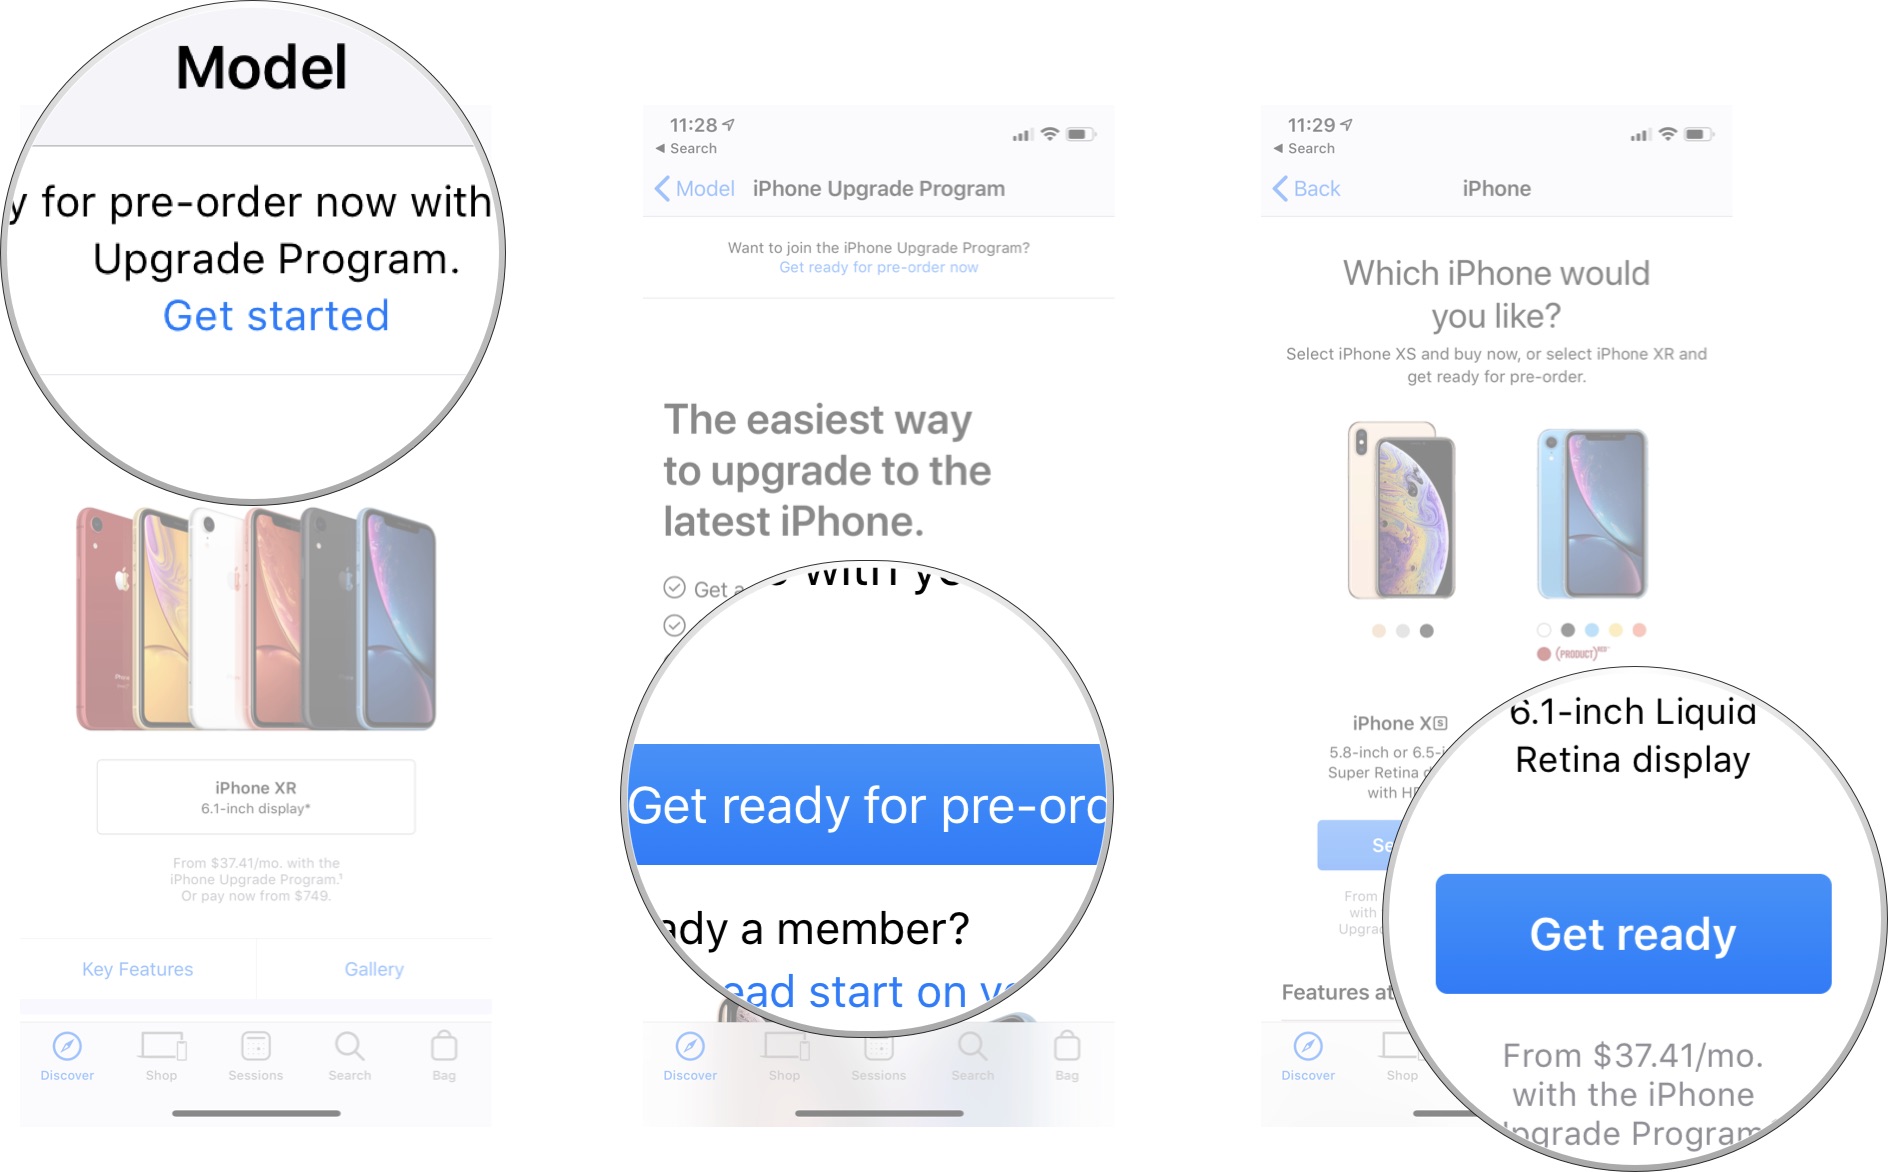 The Apple Store App showing how to get preapproval for iPhone  preorders in the iPhone Upgrade Program